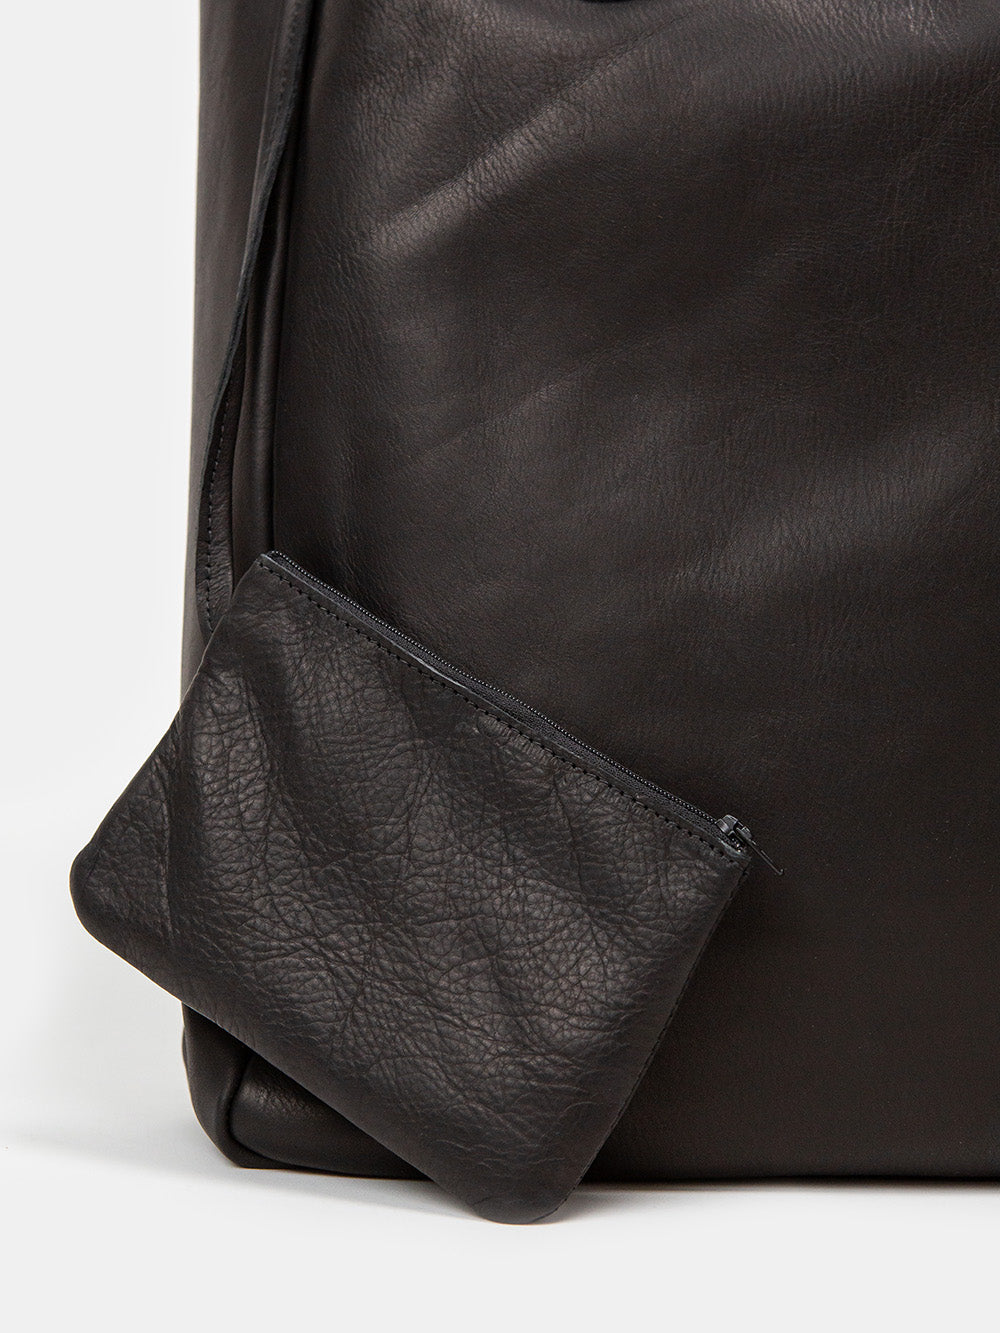 Eve Leather Tote in Black